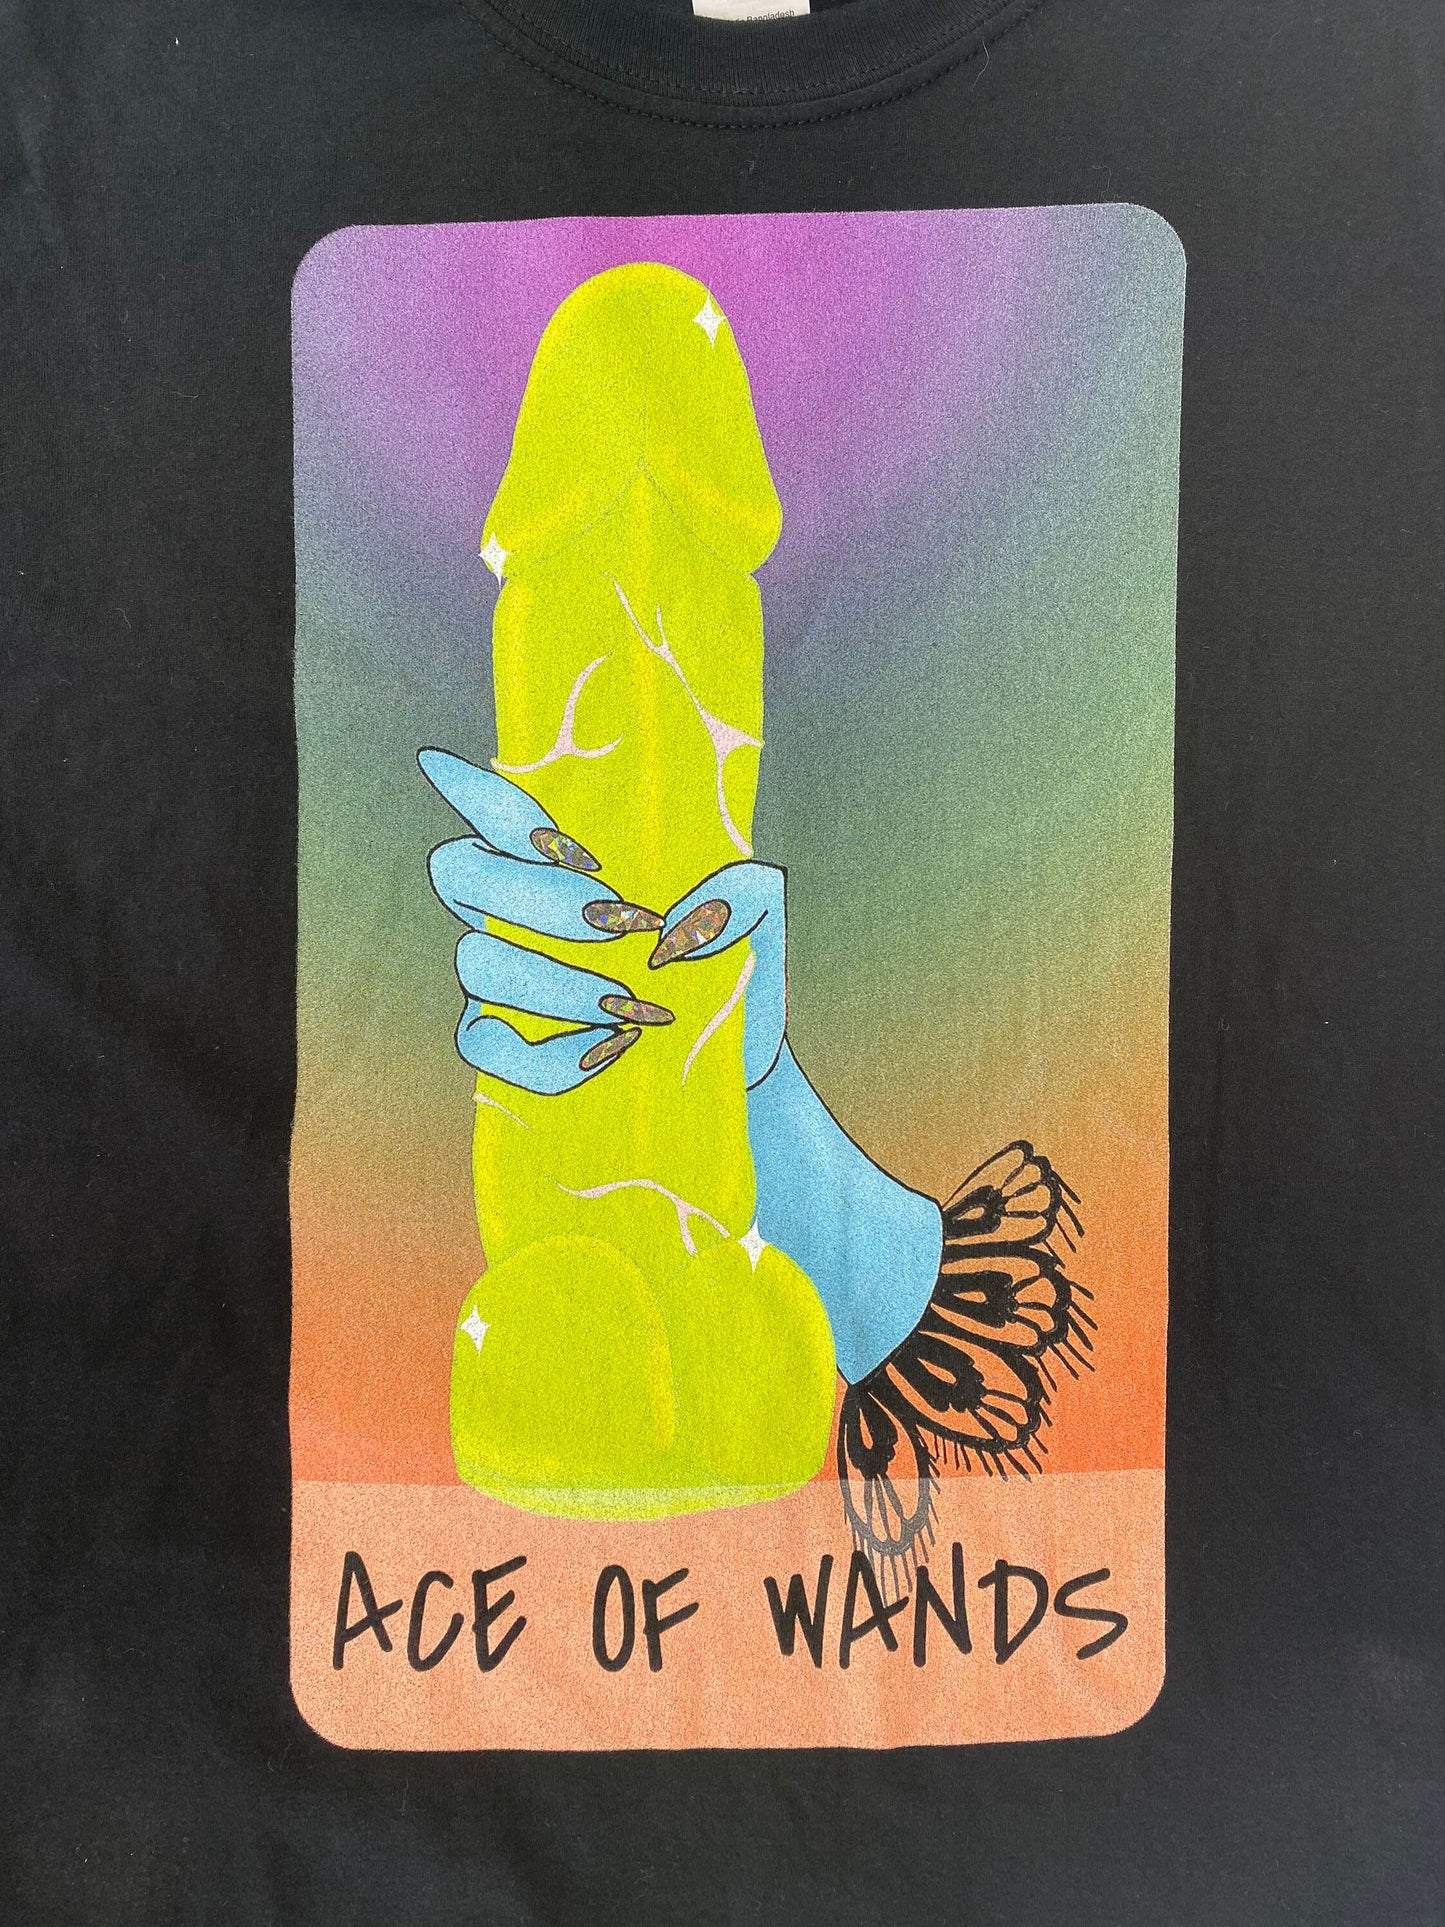 Ace of Wands Tee - Available in sizes S-3XL